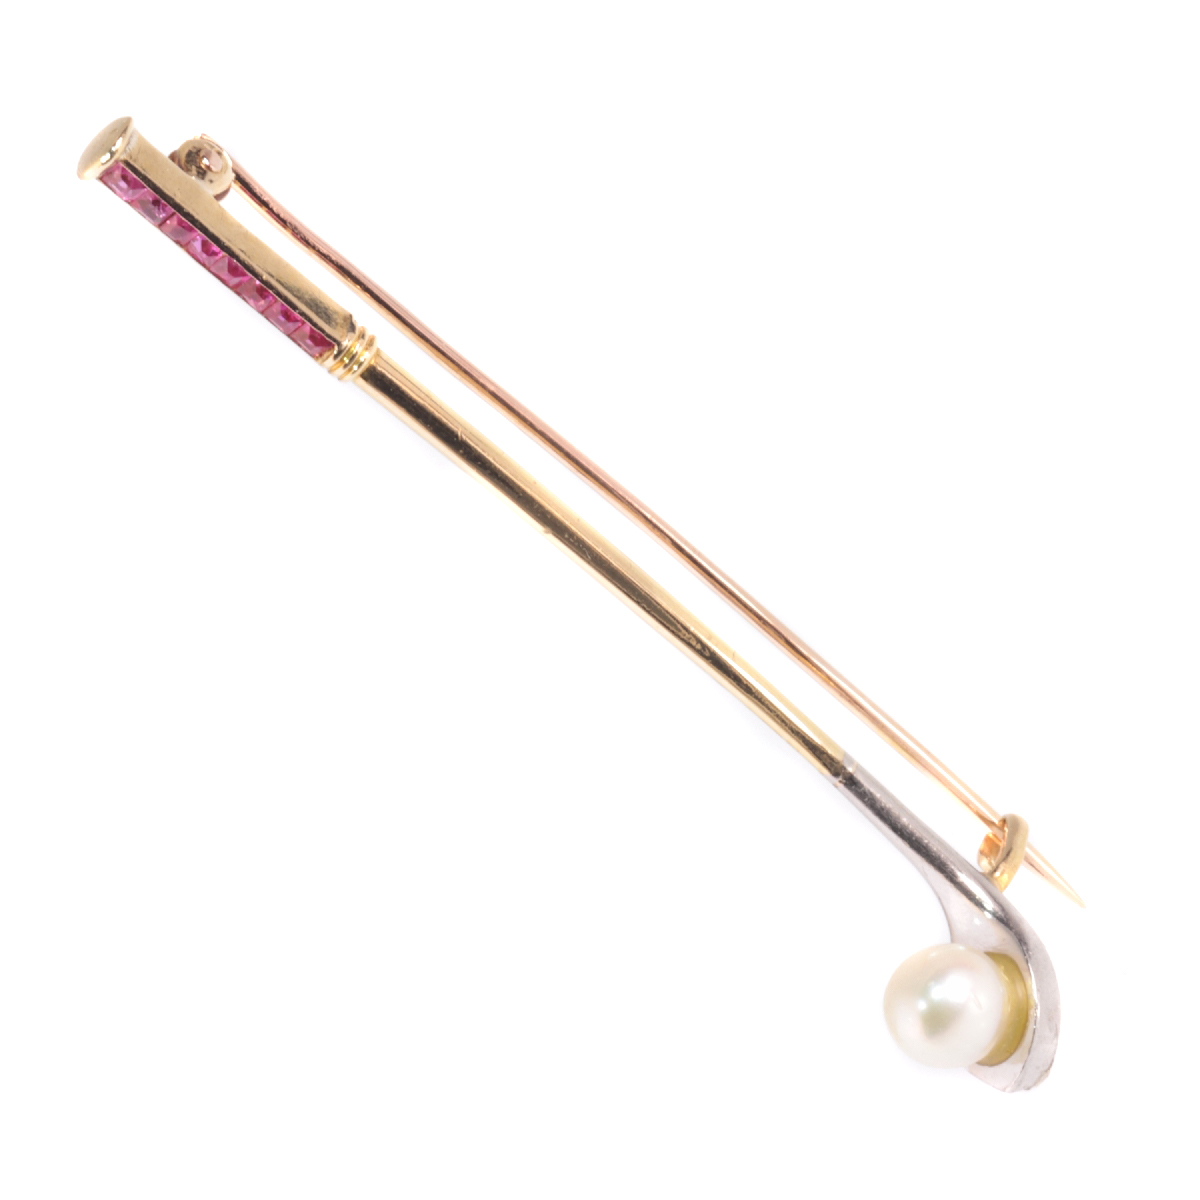 Vintage Art Deco golf club with pearl and rubies gold and platinum pin